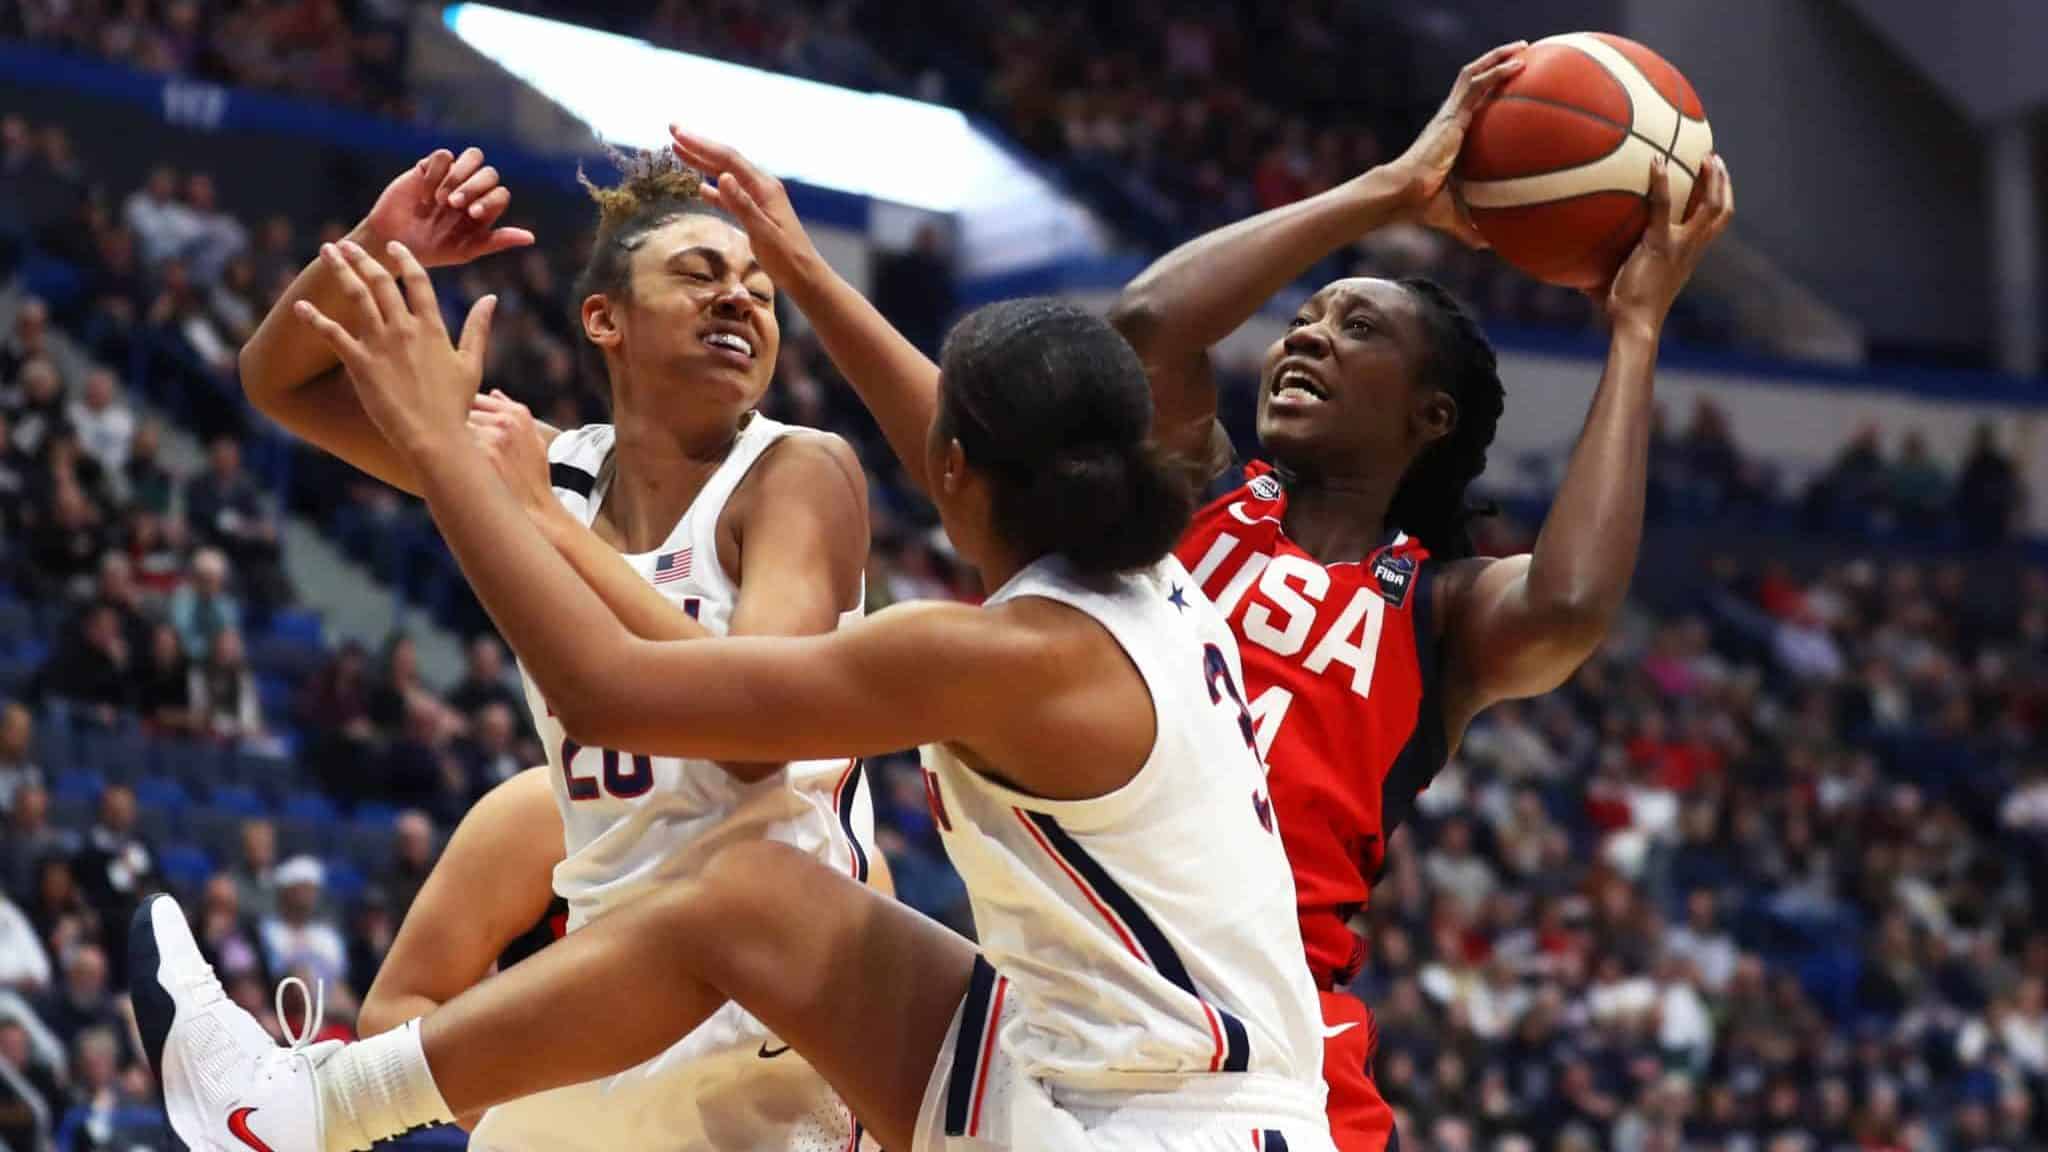 HARTFORD, CONNECTICUT - JANUARY 27: Tina Charles #14 of the United States looks for a shot over Megan Walker #3 and Olivia Nelson-Ododa #20 of the UConn Huskies during USA Women's National Team Winter Tour 2020 game between the United States and the UConn Huskies at The XL Center on January 27, 2020 in Hartford, Connecticut.